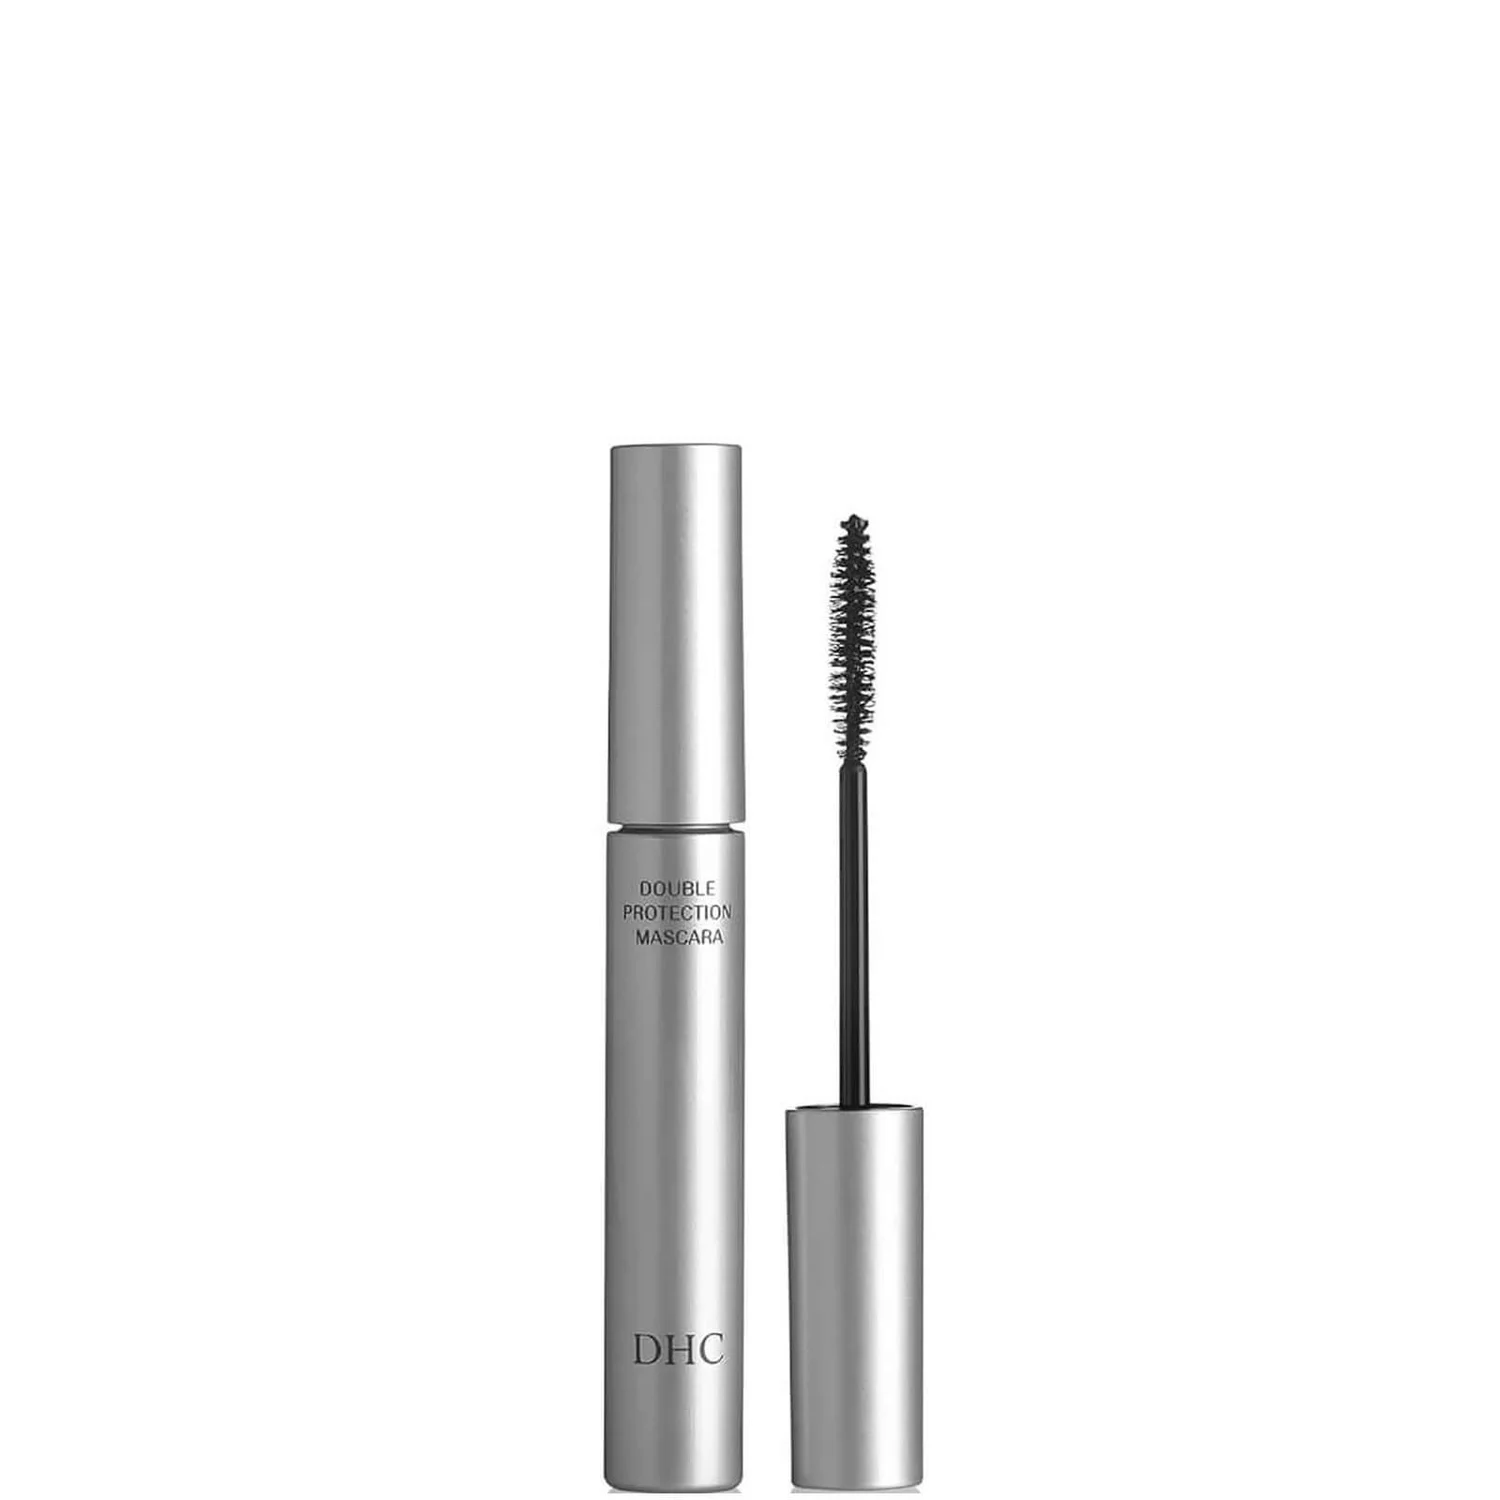 dermstore.com | DHC Mascara Perfect Pro Double Protection - Black